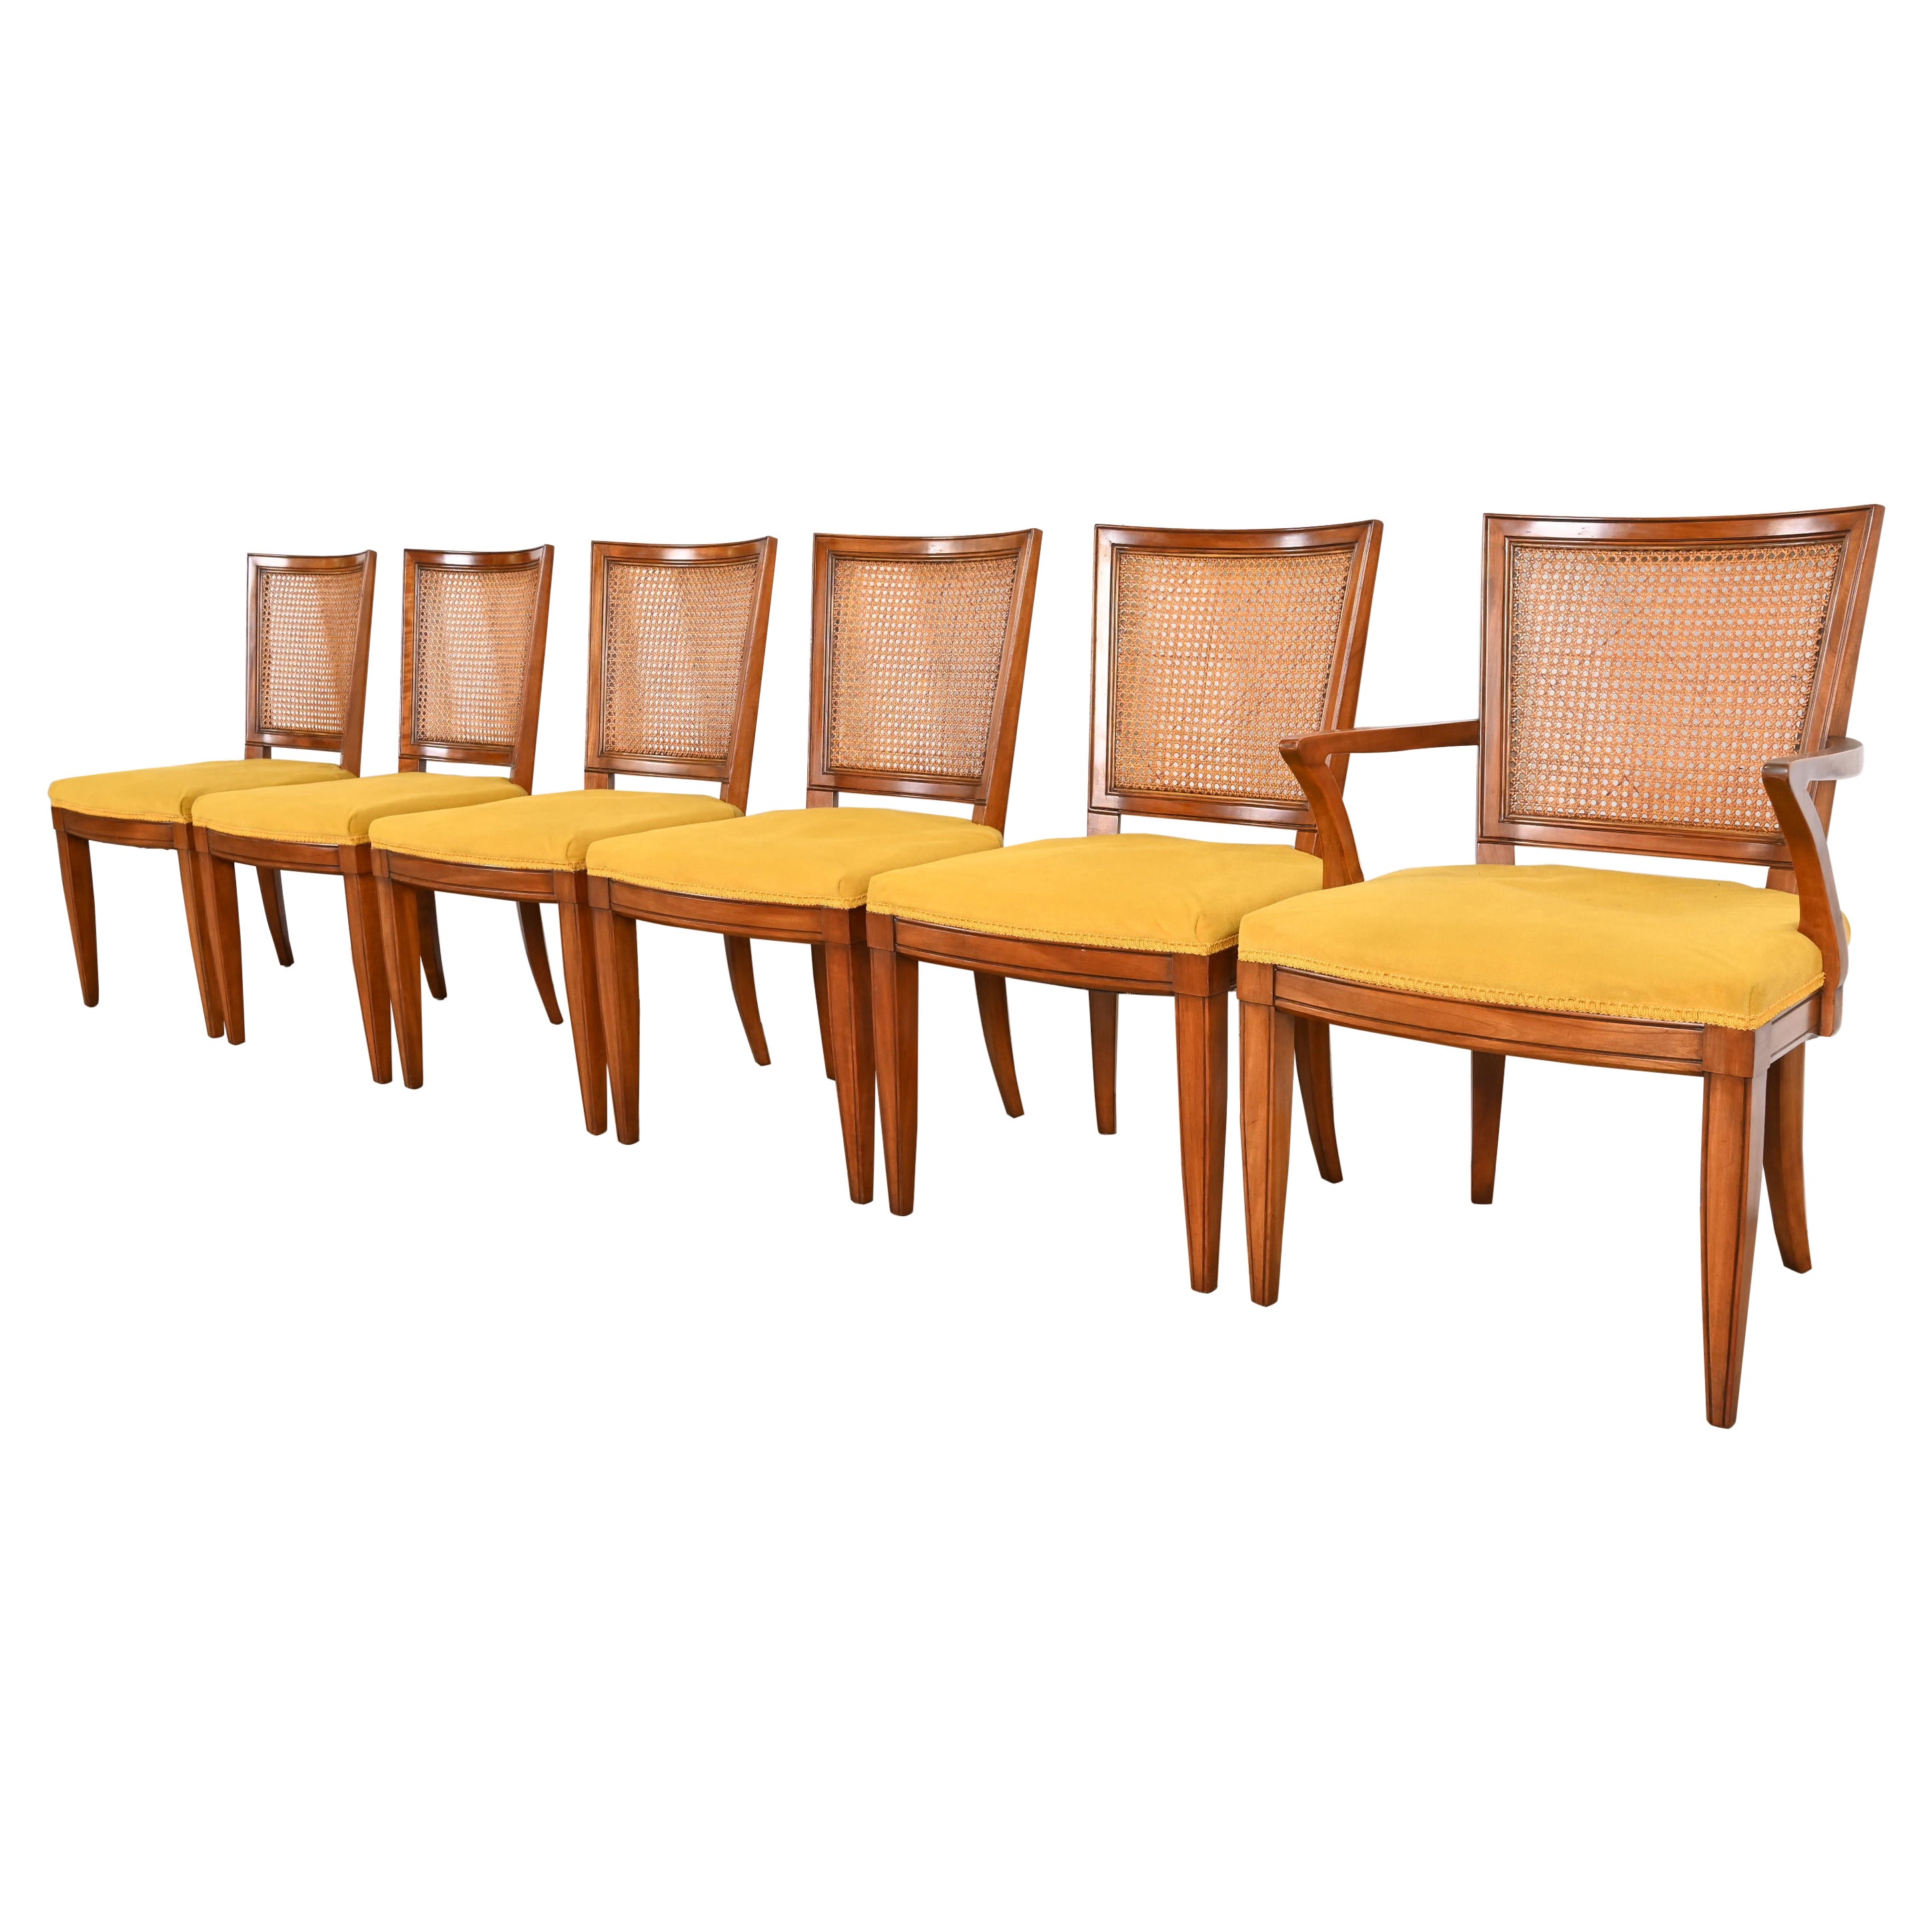 Kindel Furniture Midcentury French Regency Cherry Wood and Cane Dining Chairs